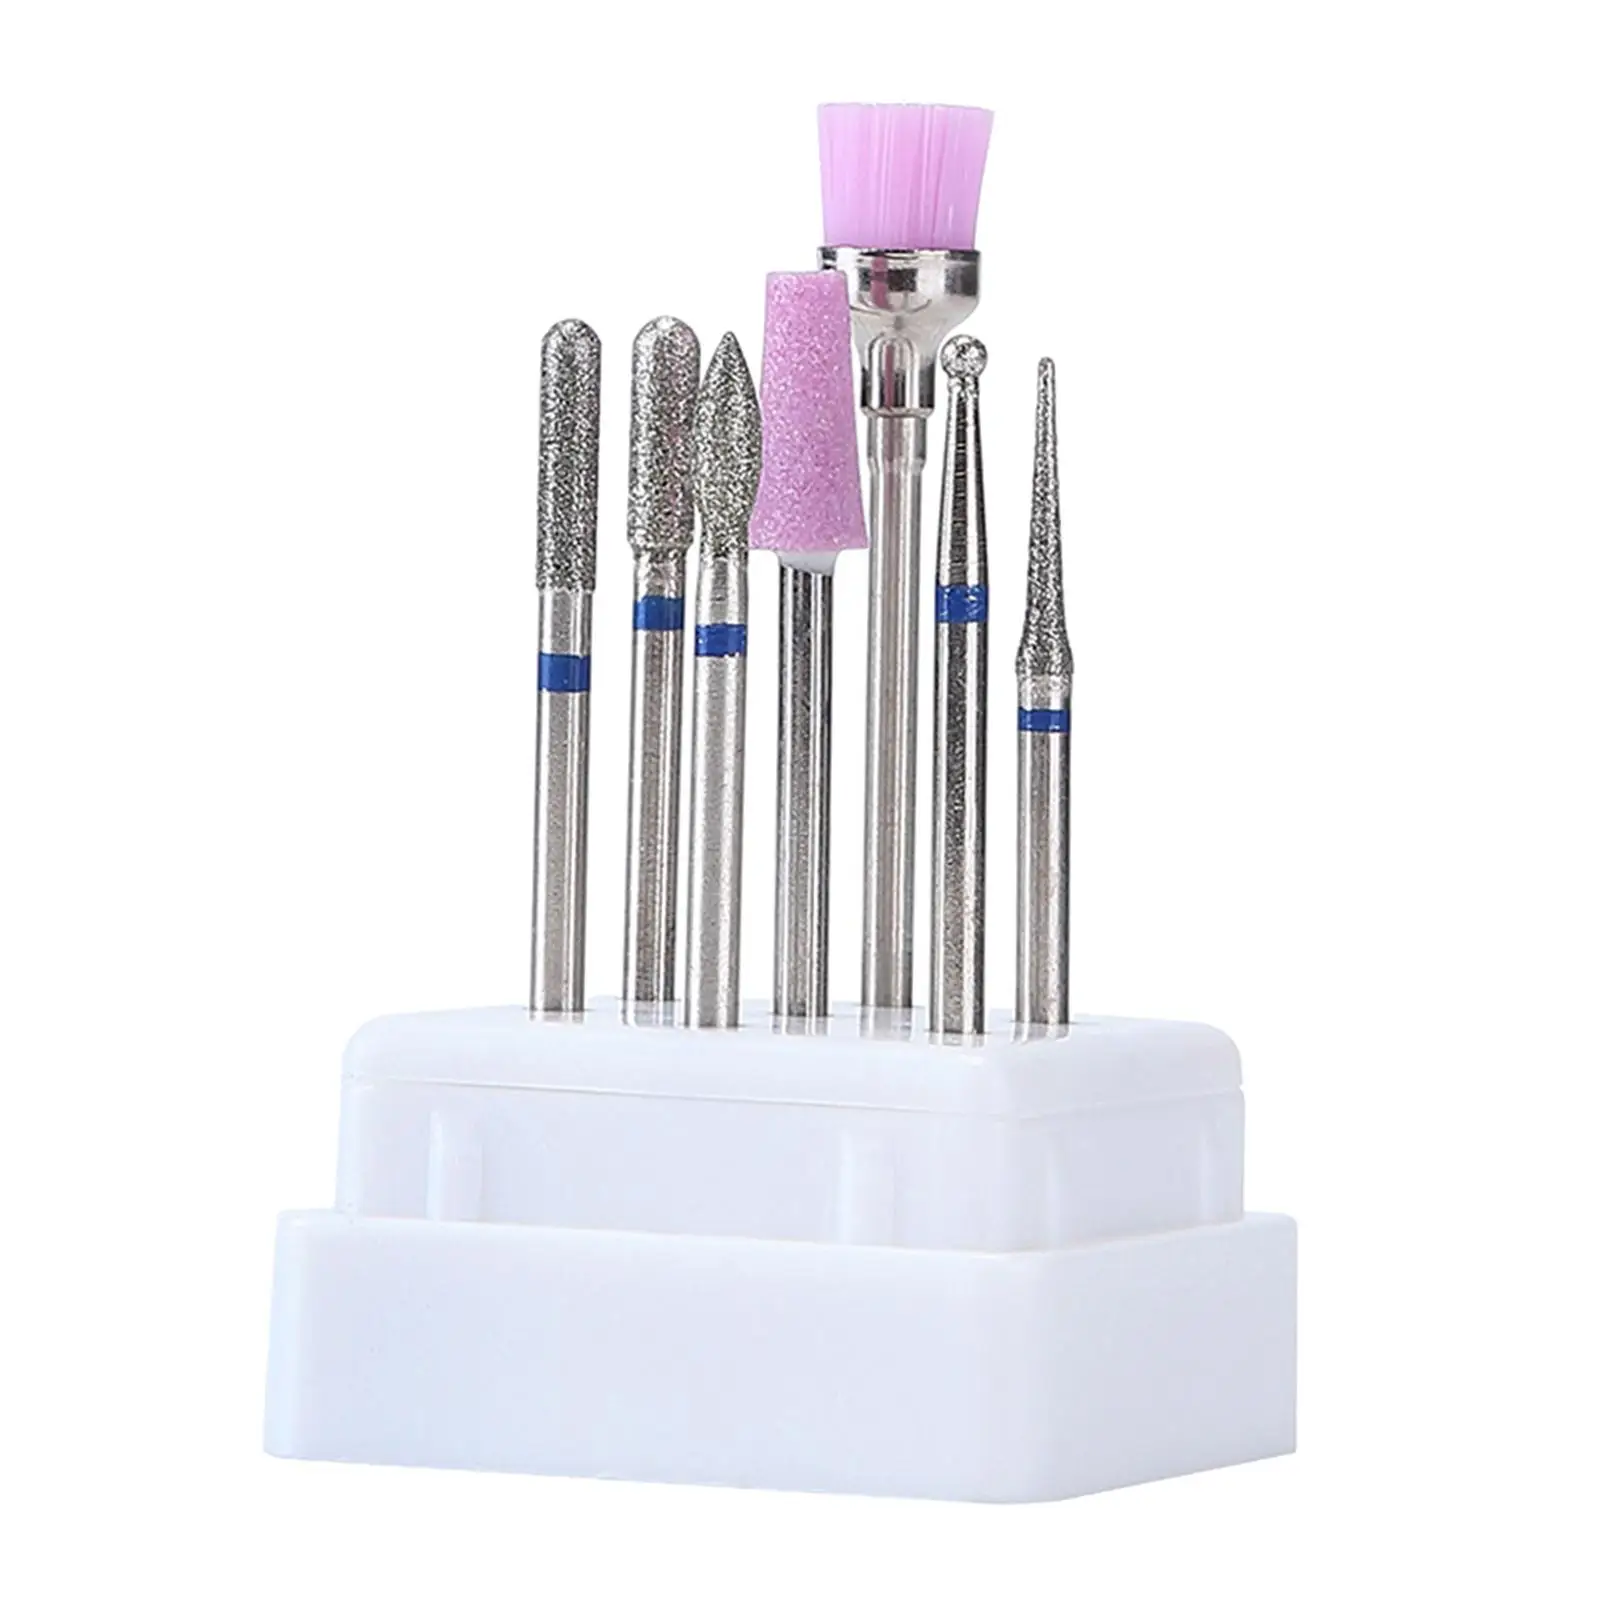 Nail Drill Bits Kit with Holder Box Polishing File Grinding Heads for Reshape Remove Gel Nails